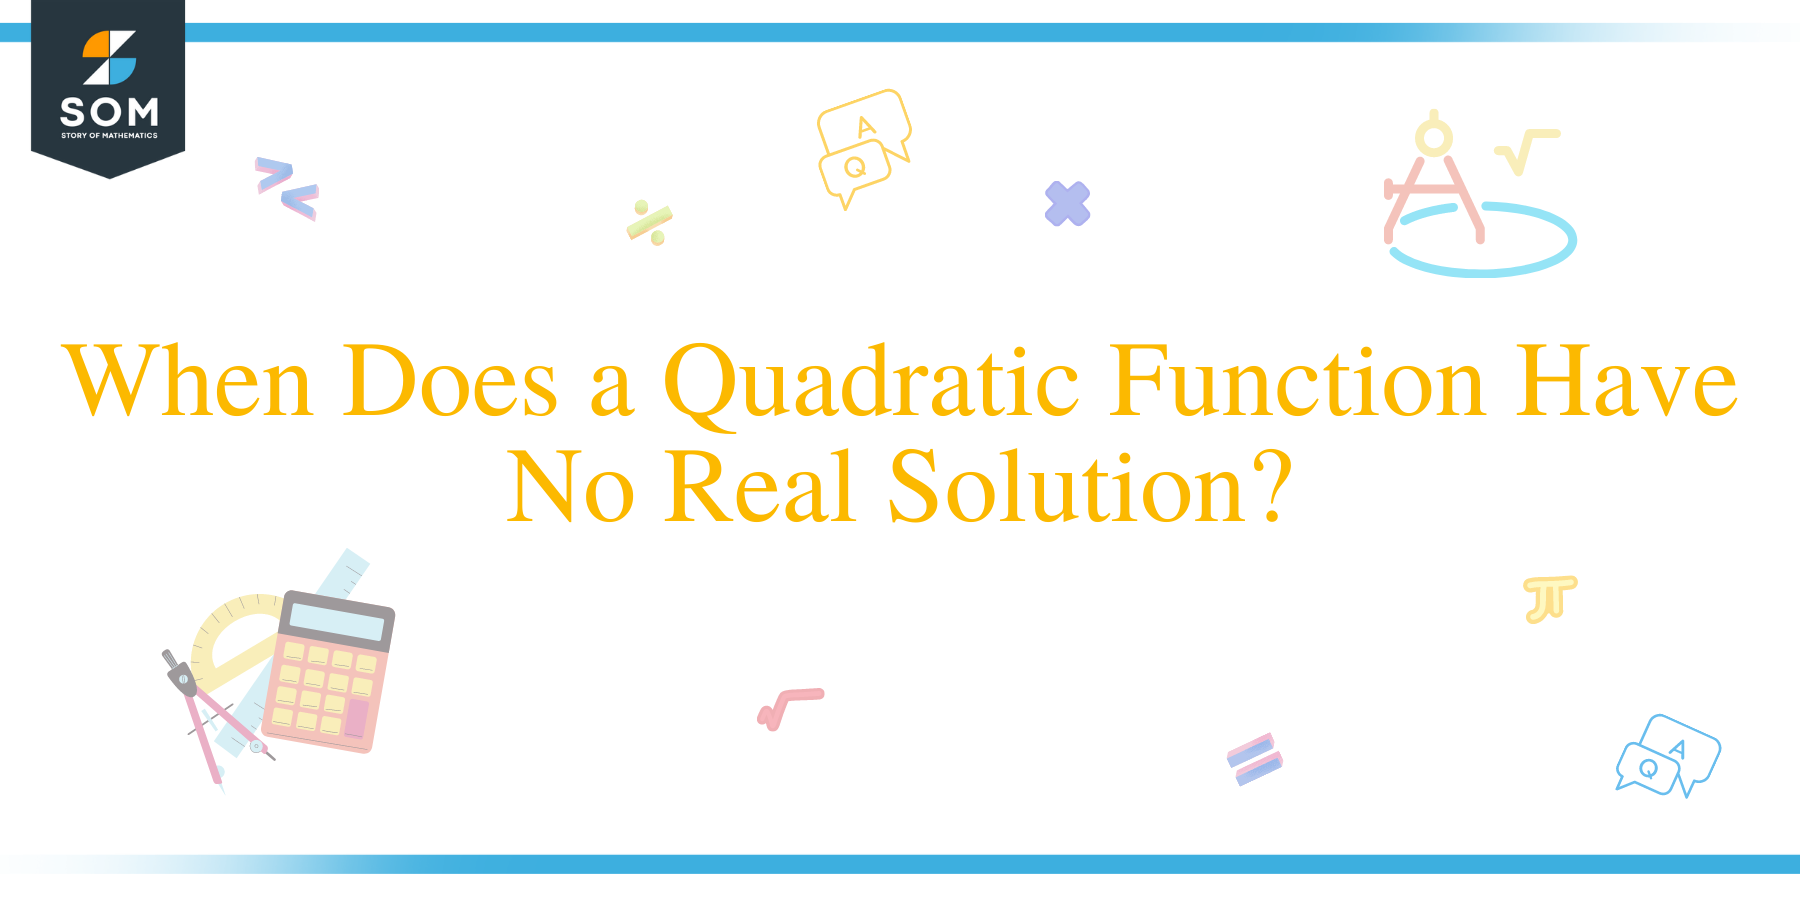 When Does a Quadratic Function Have No Real Solution?